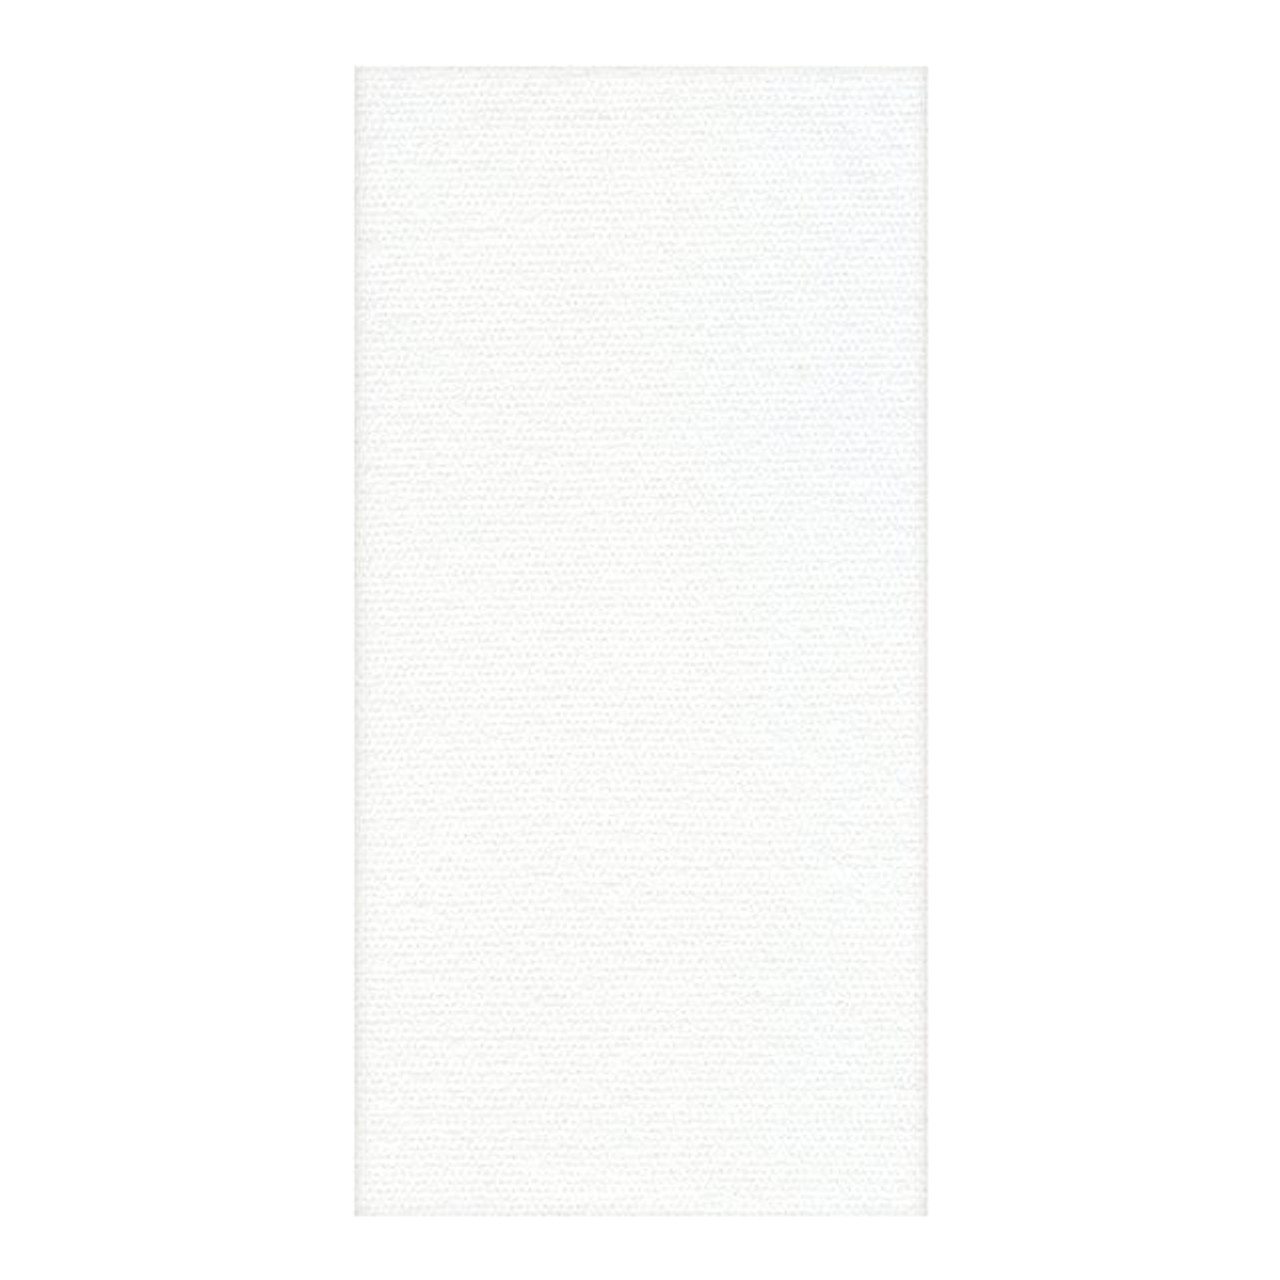 Hoffmaster Dinner Napkins, 1/8 Fold, Linen Like White 17 X 17In | 75UN/Unit, 4 Units/Case